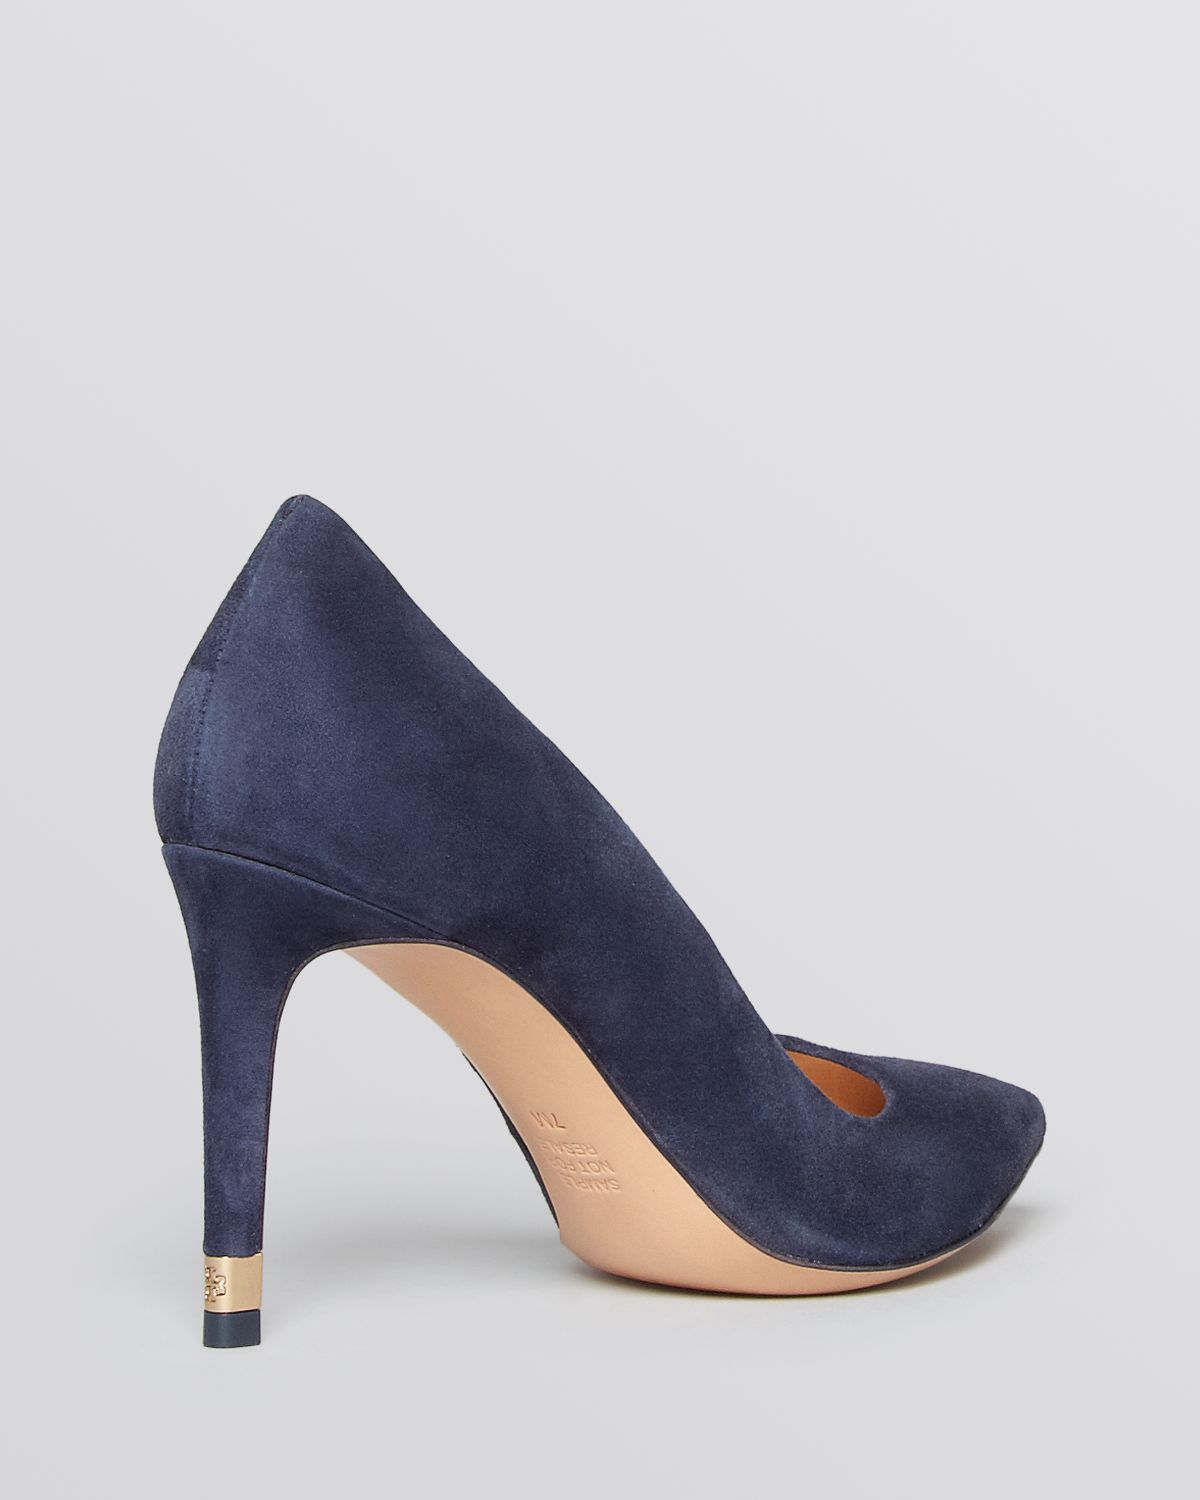 Tory Burch Pointed Toe Pumps - Greenwich High Heel in Blue | Lyst